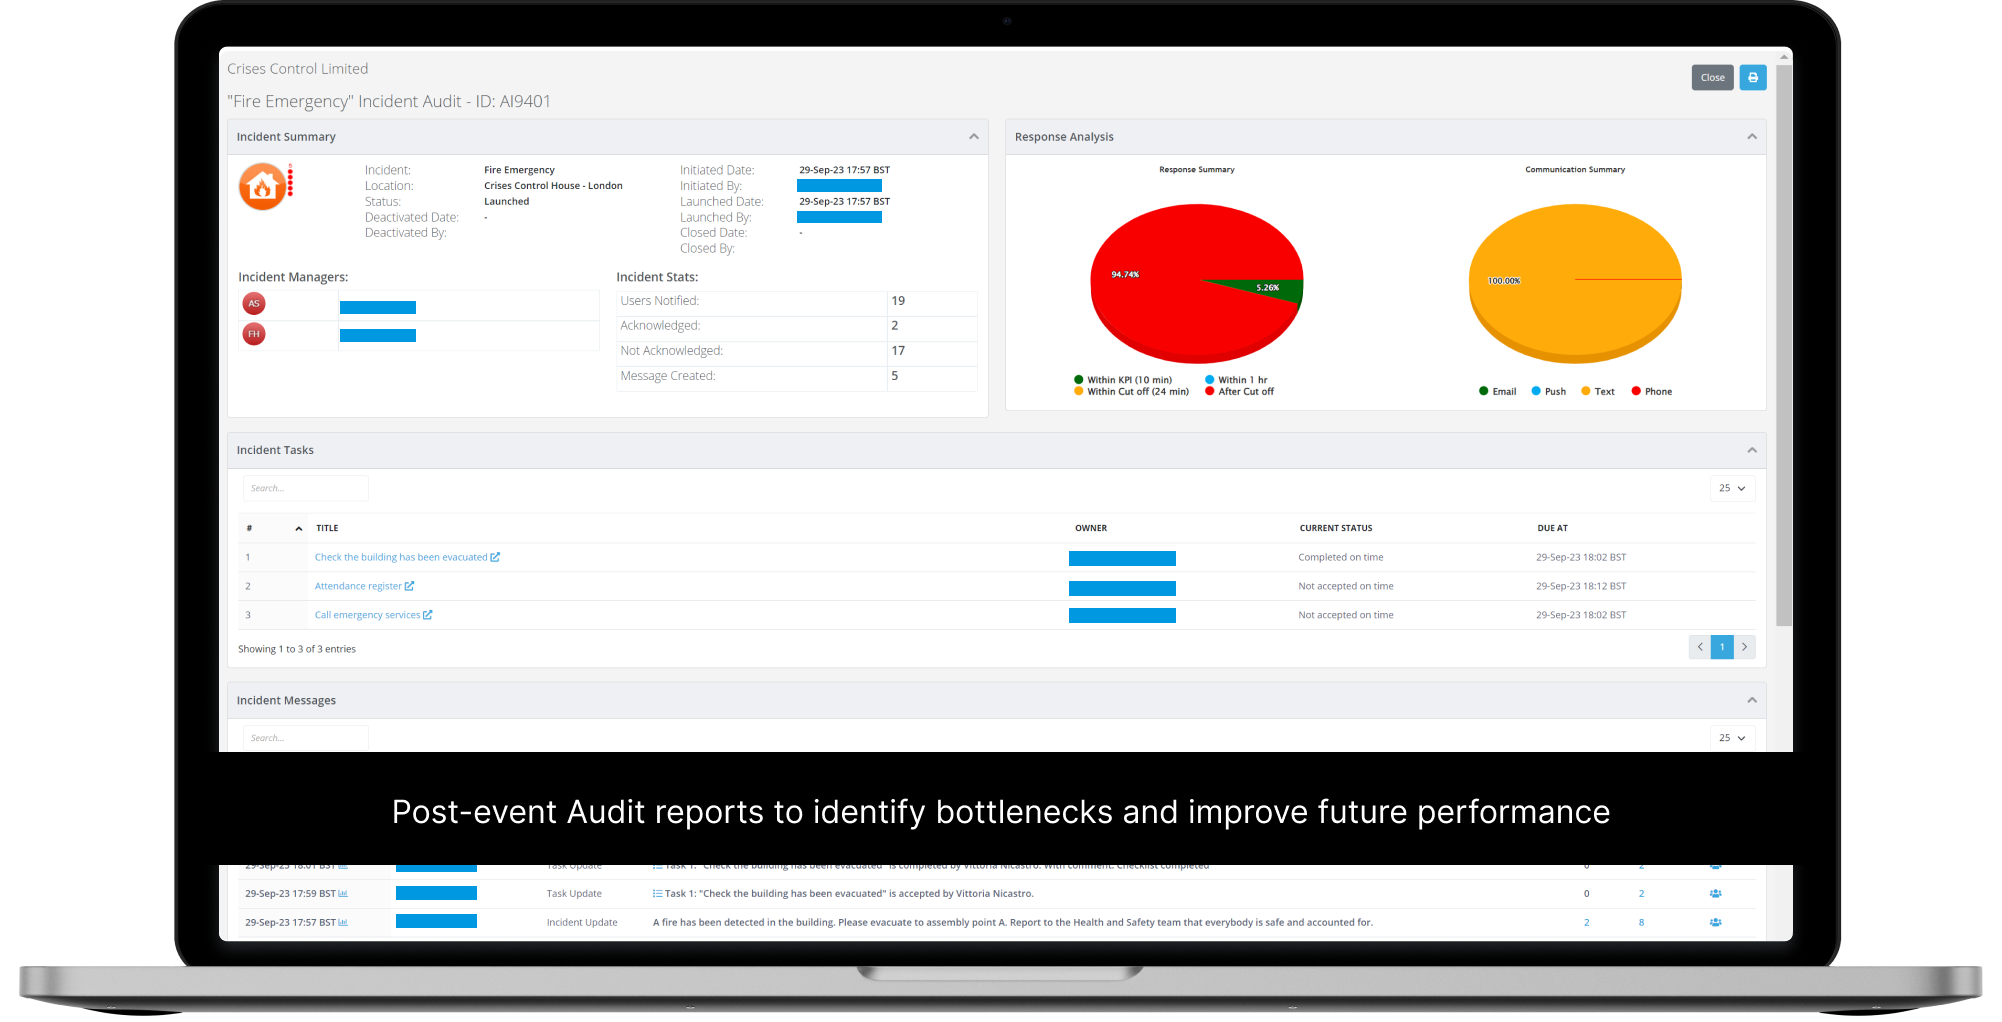 Incident Reporting and Auditing - With the Crises Control platform, every message, task, and timeline is automatically recorded for you to use post-event.